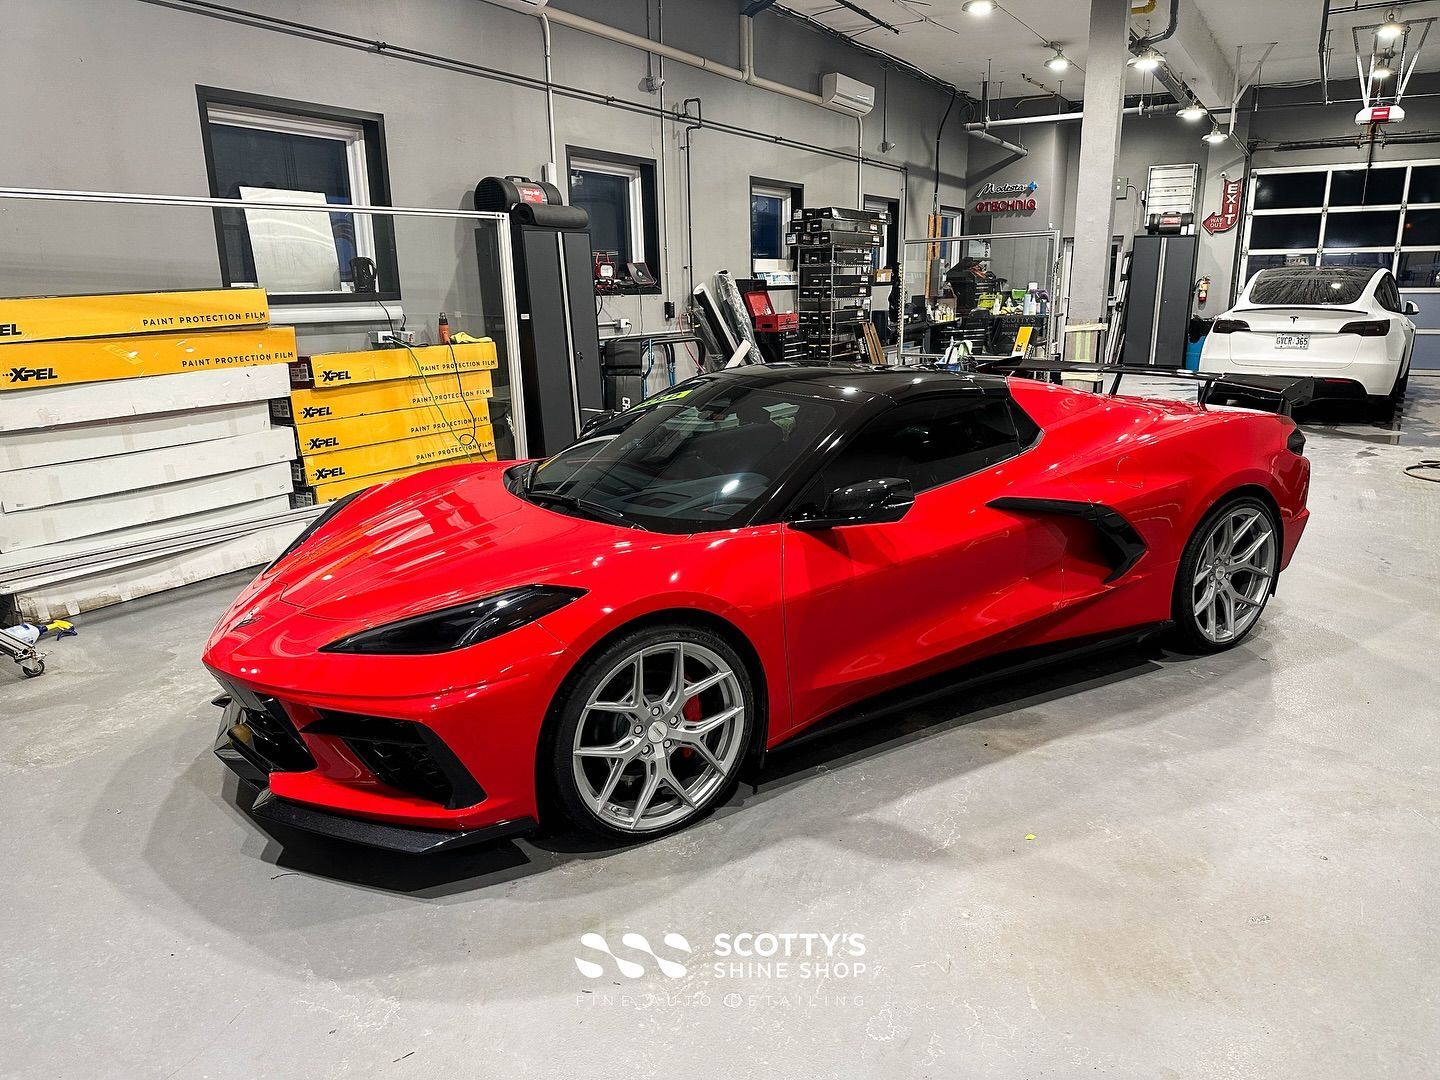 Nearing completion on this monster Corvette project! Full body coverage with Xpel Ultimate Plus pain